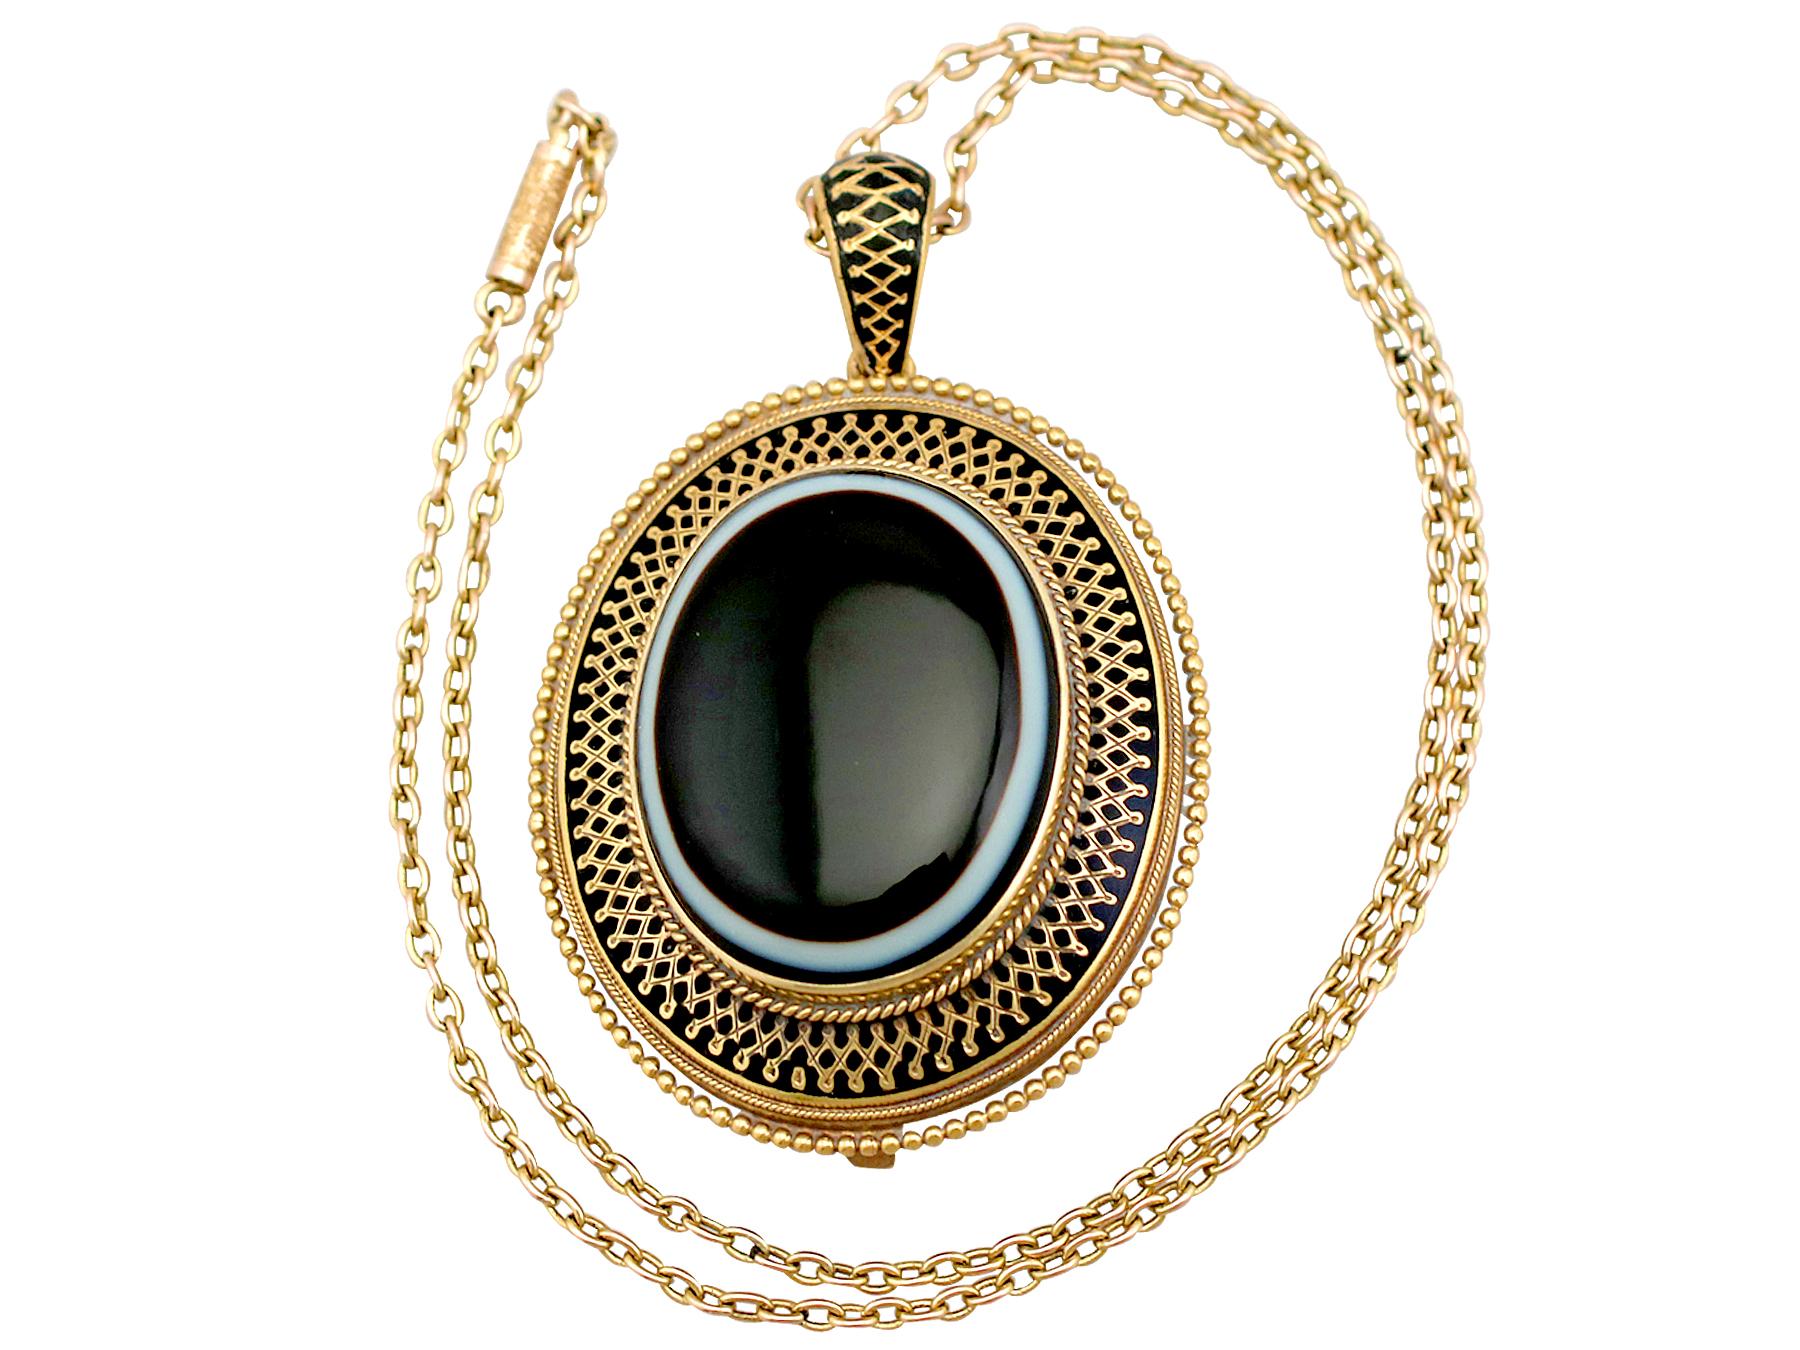 This exceptional, fine and impressive antique mourning pendant has been crafted in 15k yellow gold.

The pendant displays an oval agate panel bezel set to the center of the 15k yellow gold frame.

The bezel setting is encircled by applied rope twist